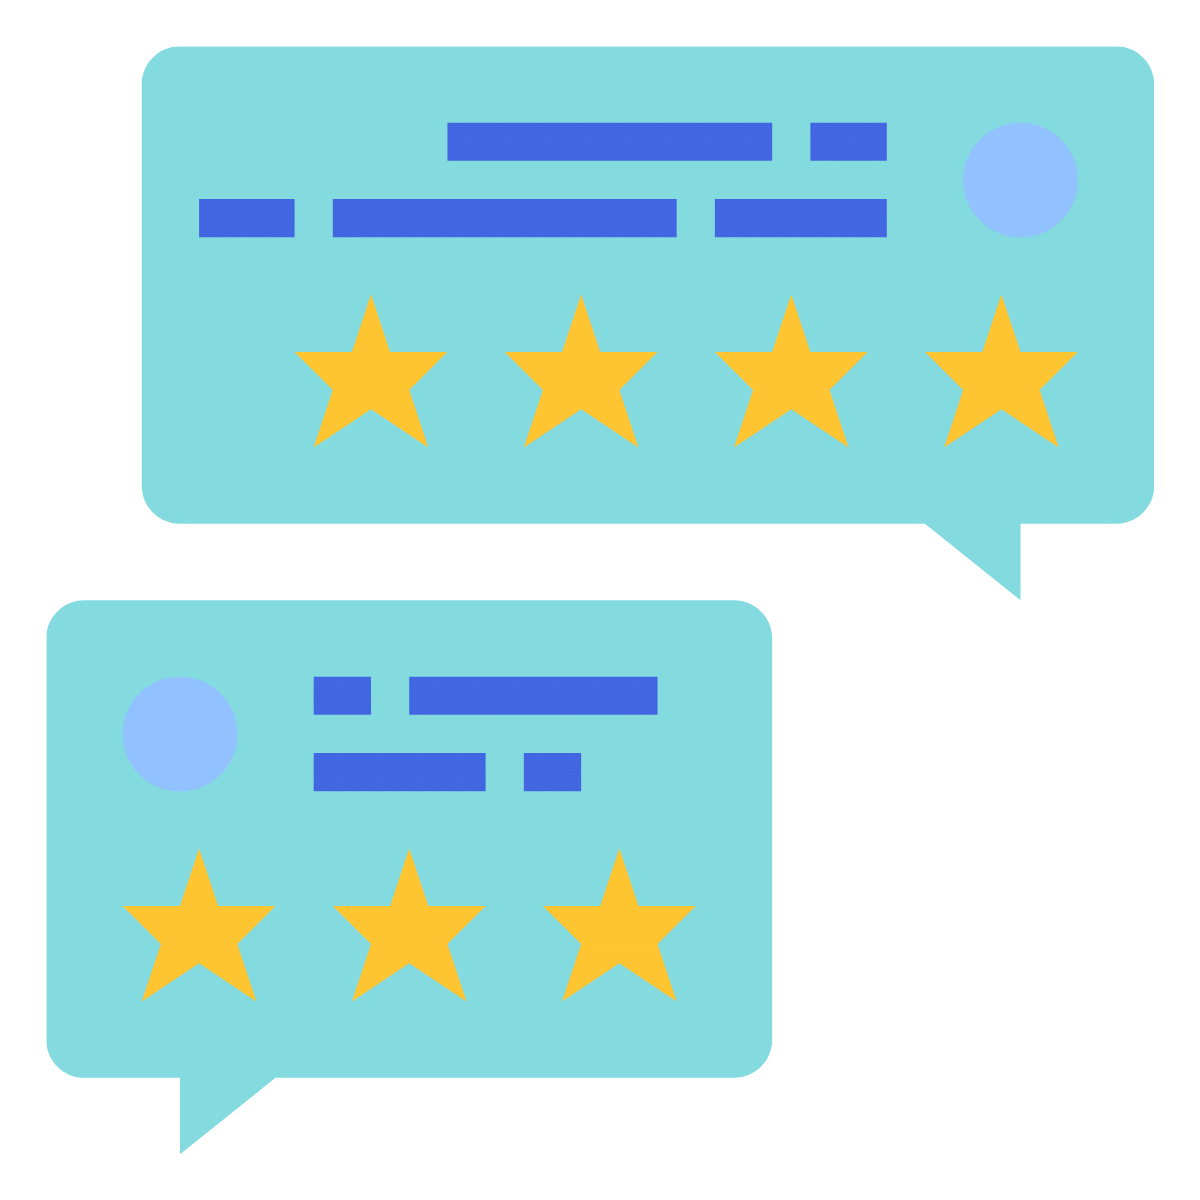 Speech bubbles with text and ratings